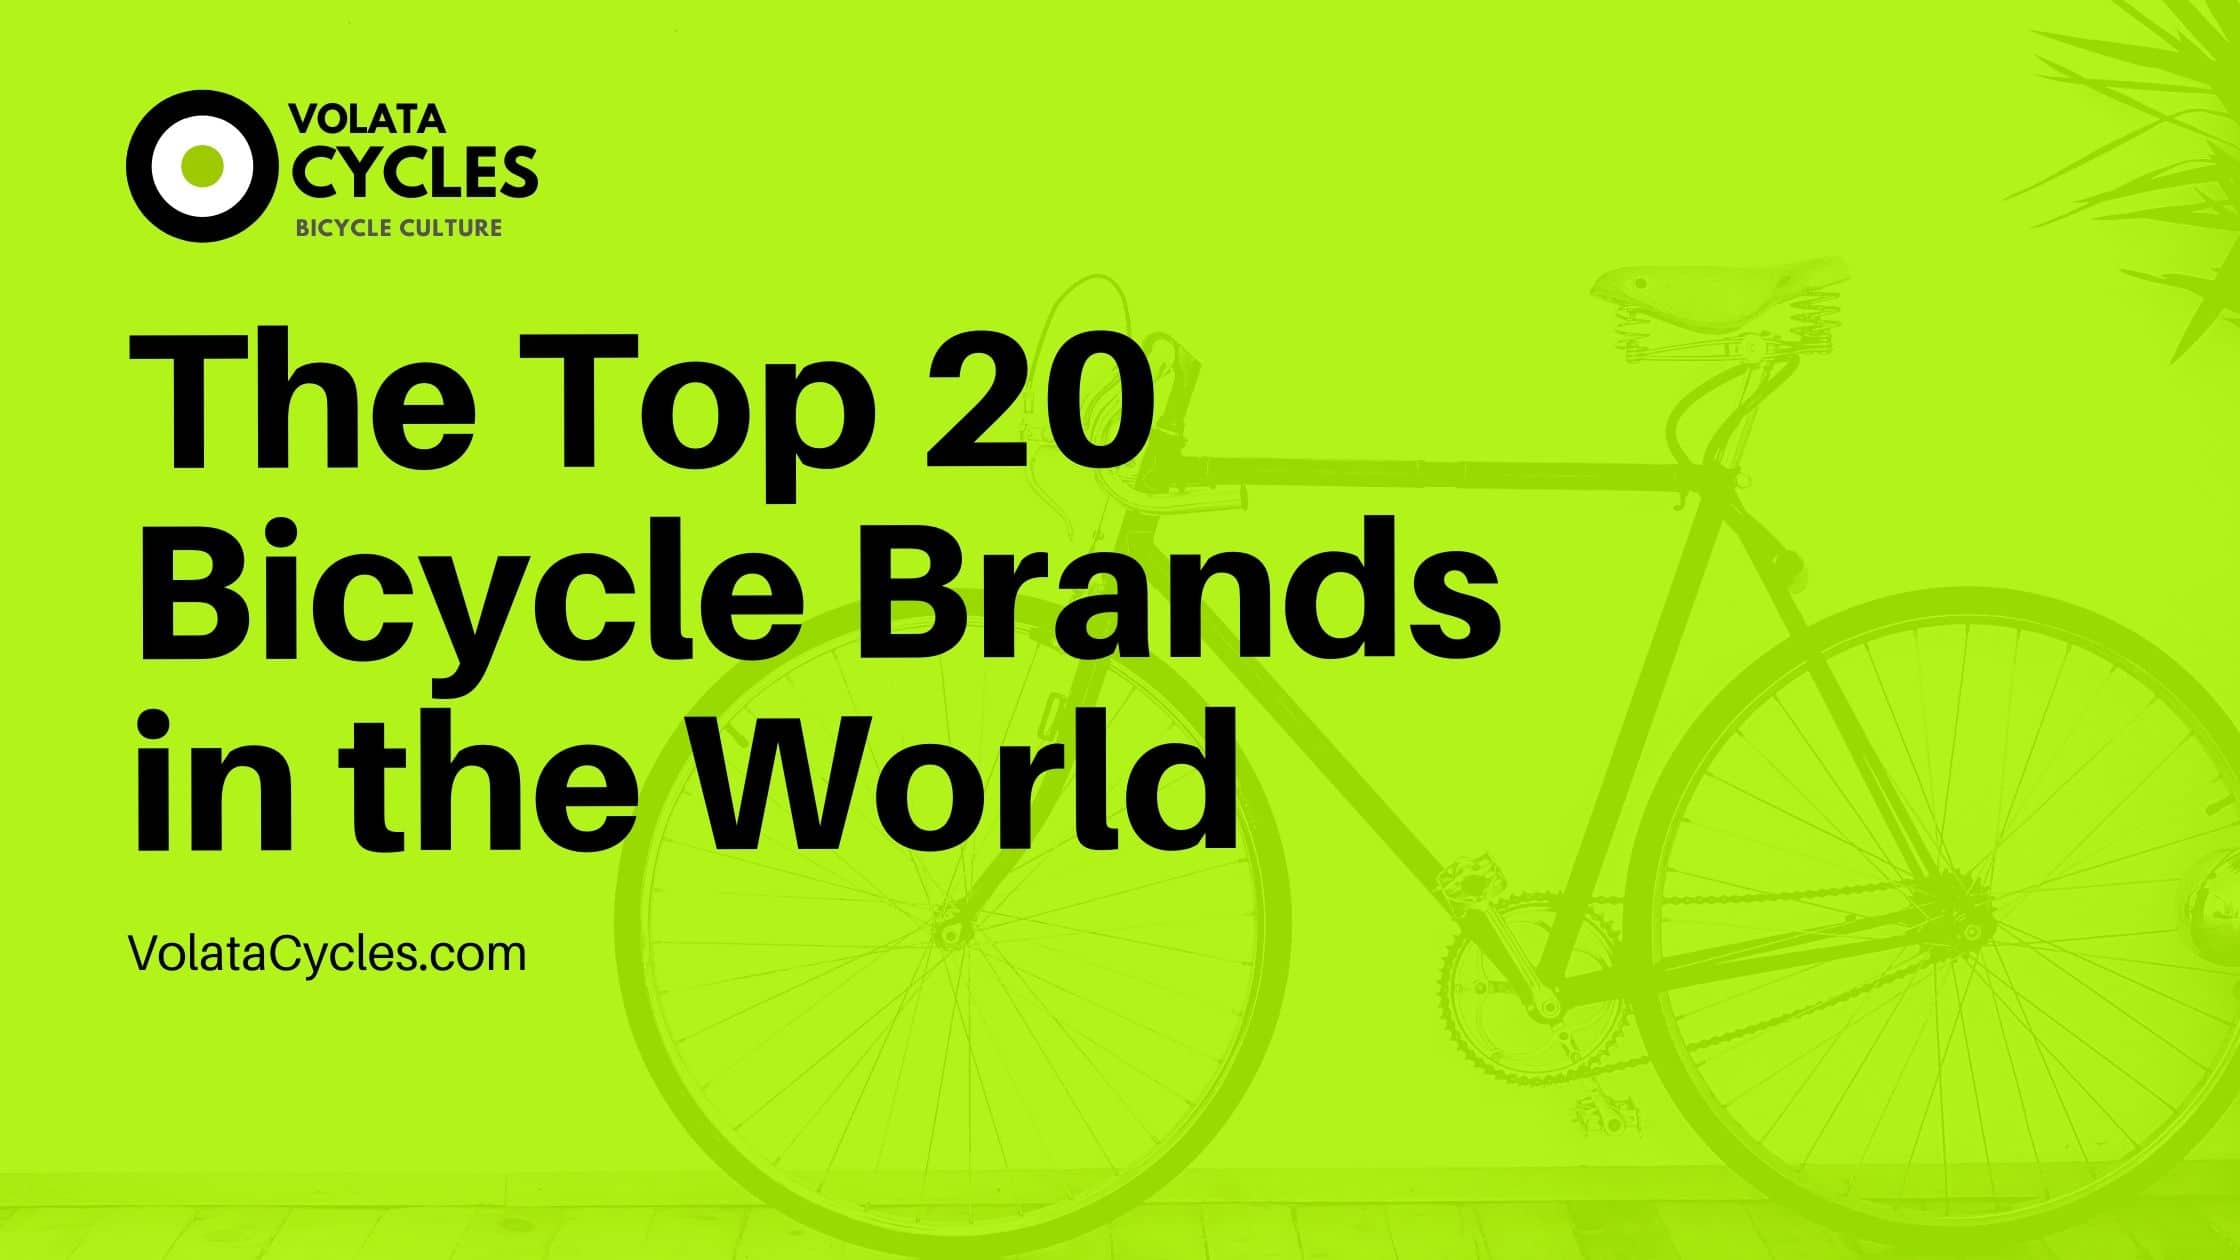 The Top 20 Bicycle Brands in the World